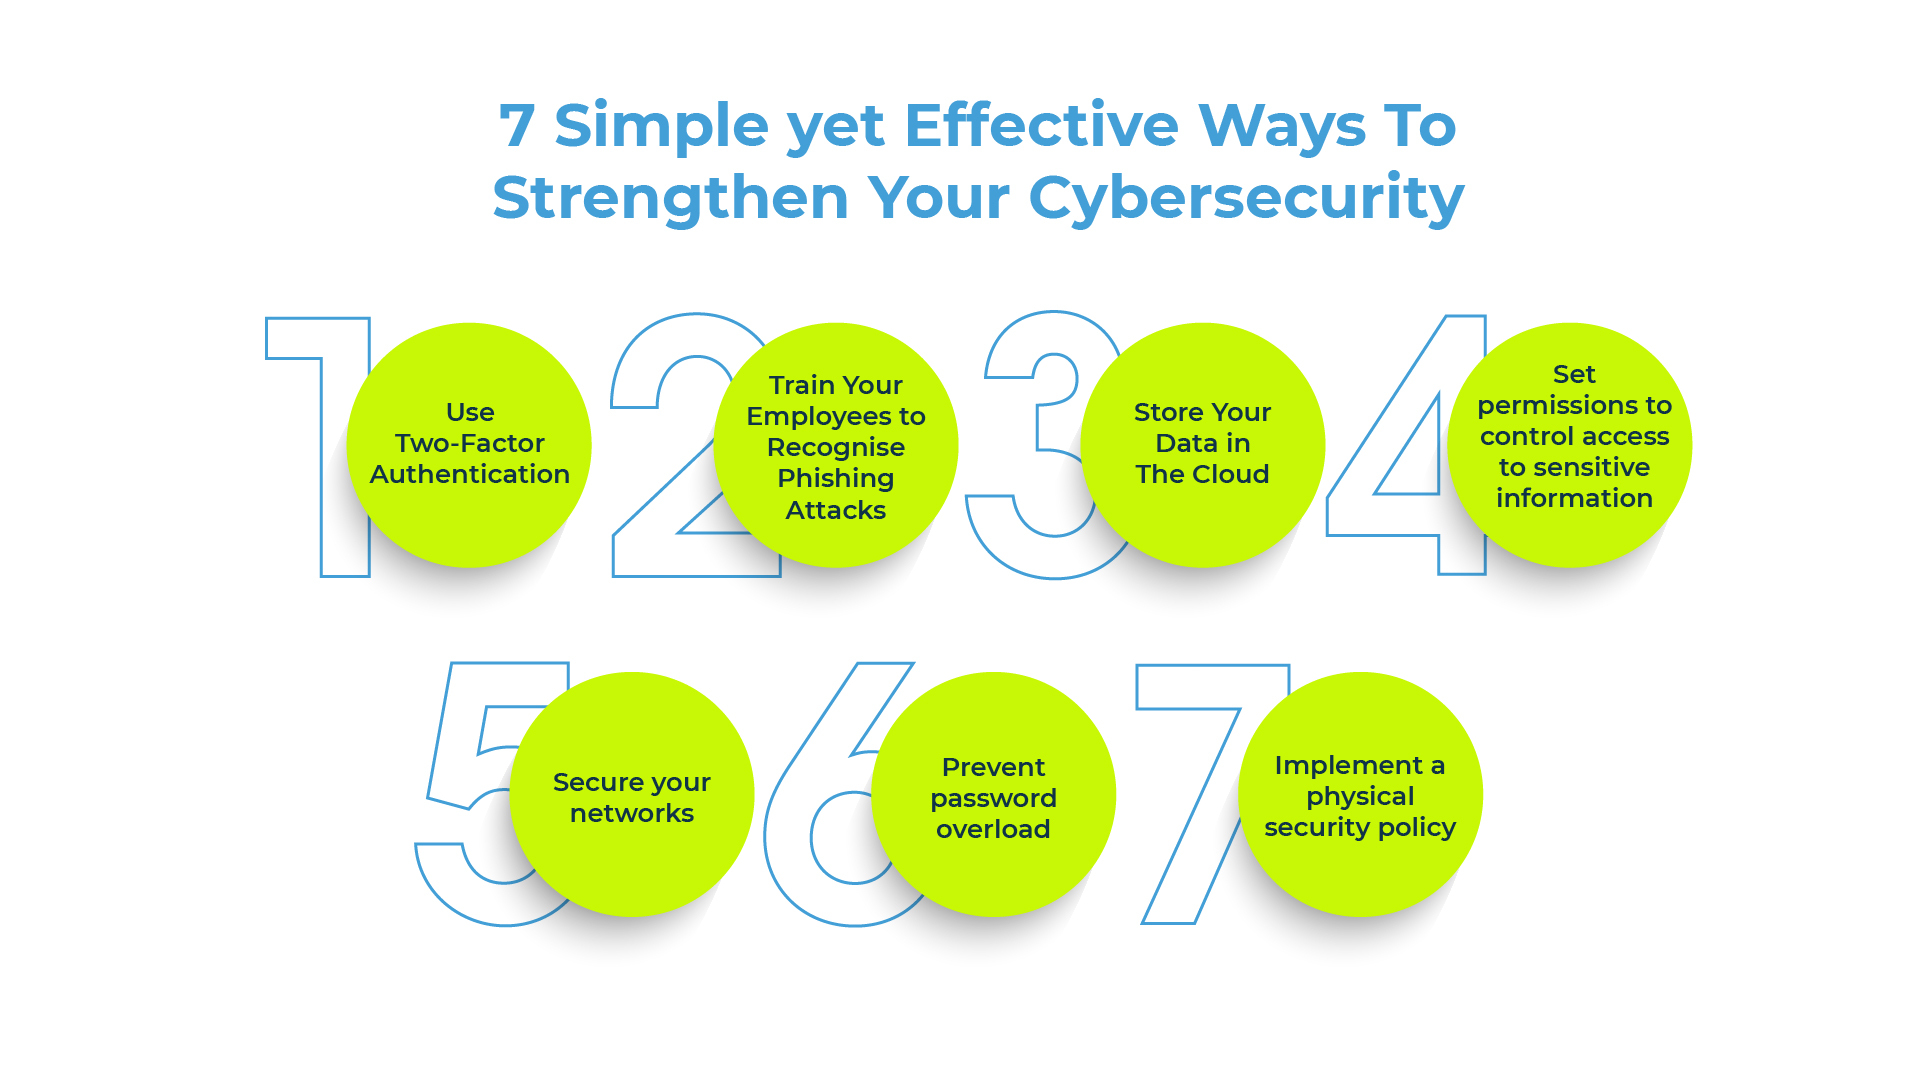 7 Simple yet Effective Ways To Strengthen Your Cybersecurity